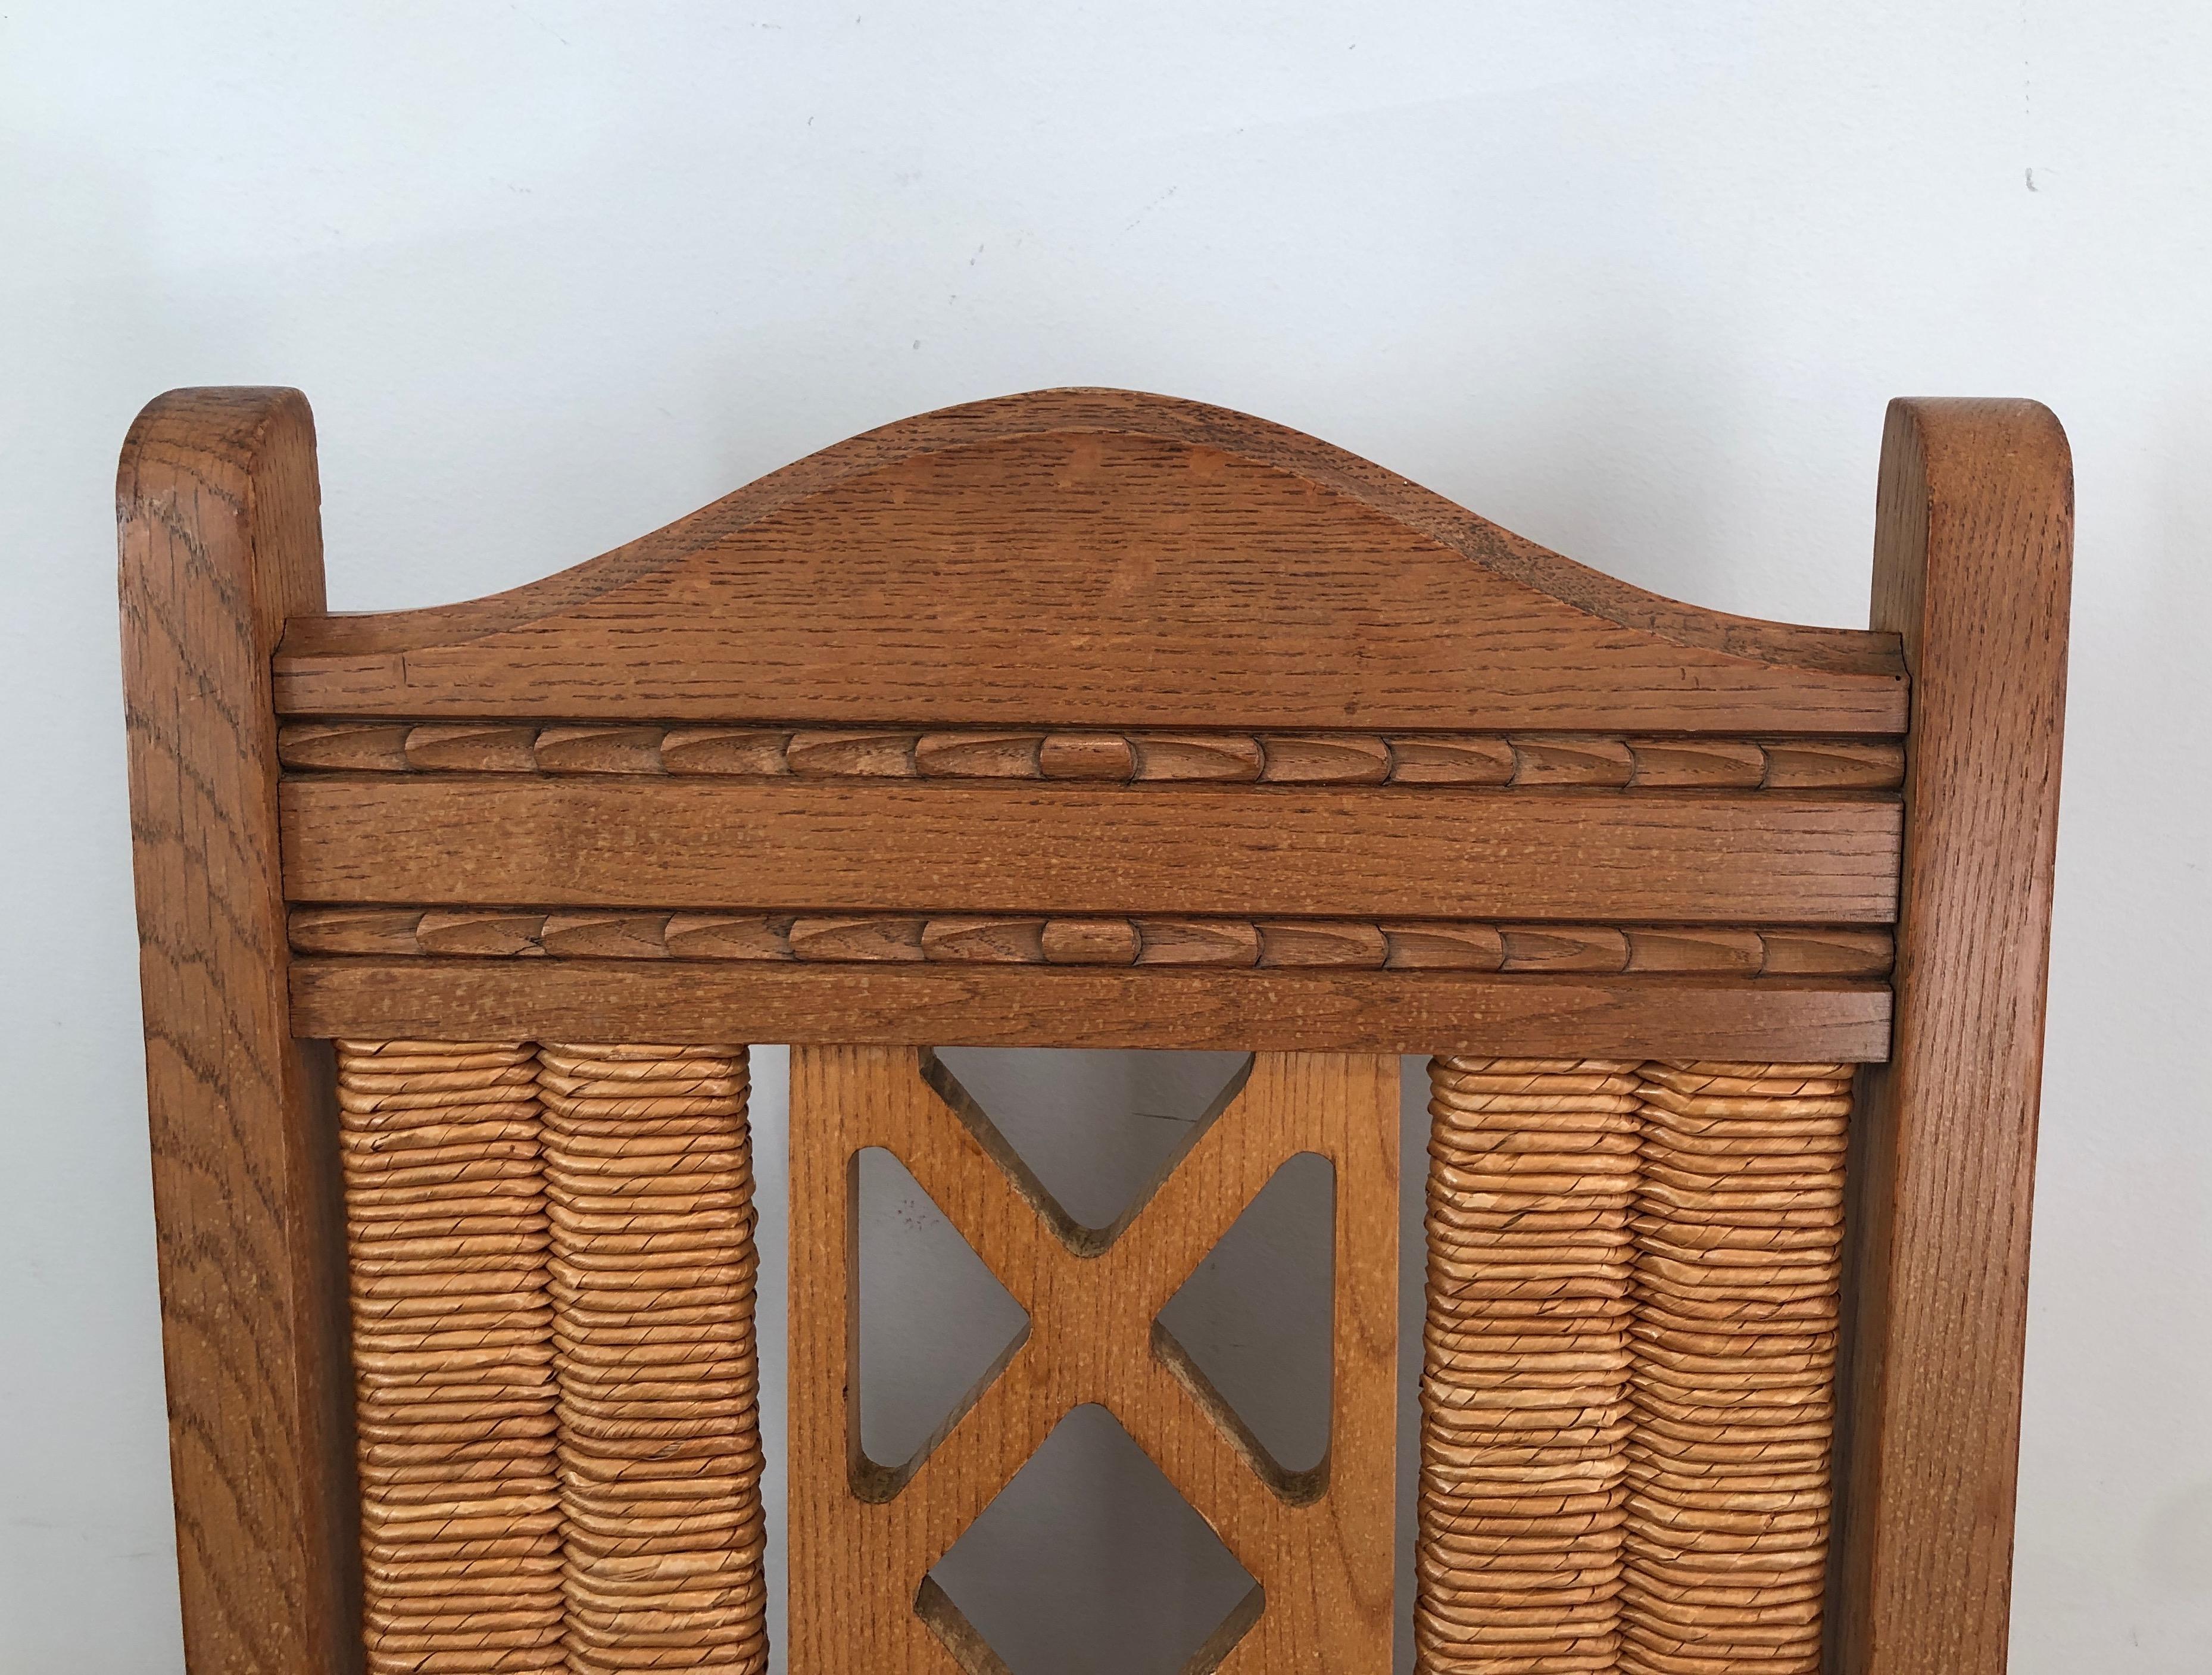 Set of 6 Brutalist Chairs Made of Ash and Straw, French Work, Circa 1950 For Sale 10